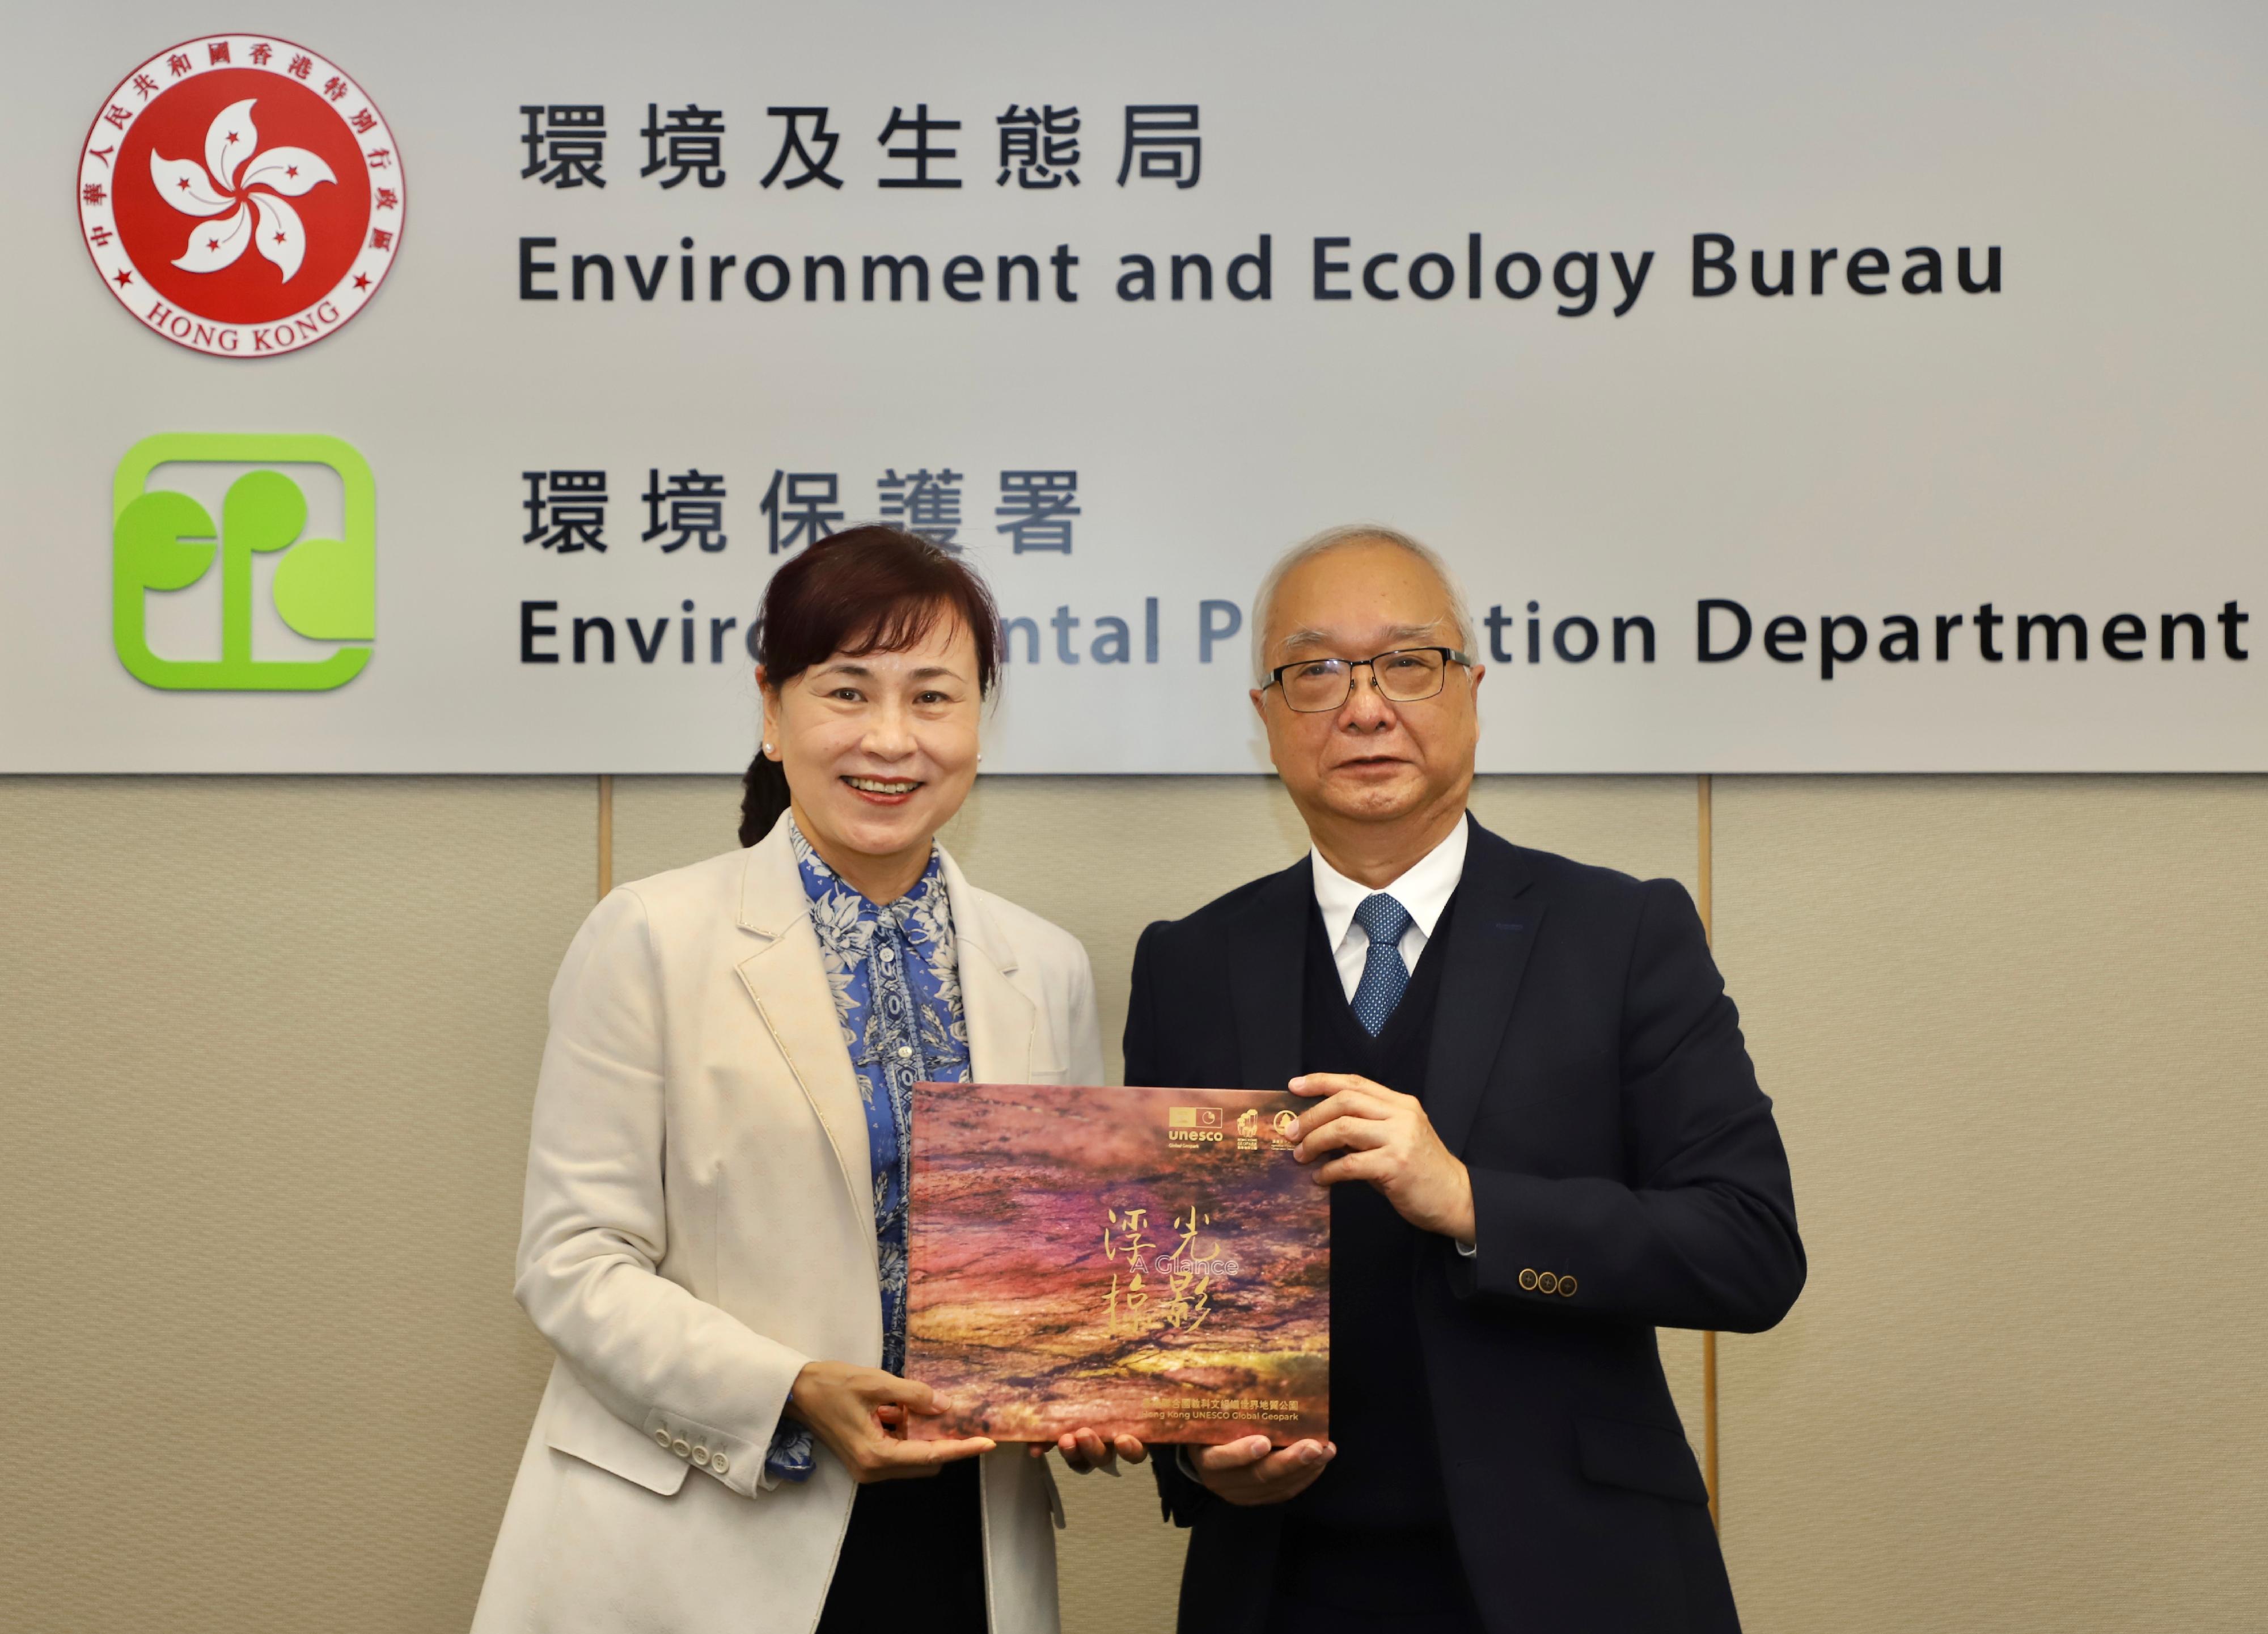 The Secretary for Environment and Ecology, Mr Tse Chin-wan (right), today (February 10) met with Vice Mayor of Shenzhen Municipal People's Government Ms Zhang Hua (left) to exchange views on environmental industry co-operation between Shenzhen and Hong Kong, and also the planning, construction and operation of waste management facilities. Photo shows Mr Tse presenting a photo book published by the Agriculture, Fisheries and Conservation Department on Hong Kong Geopark to Ms Zhang.